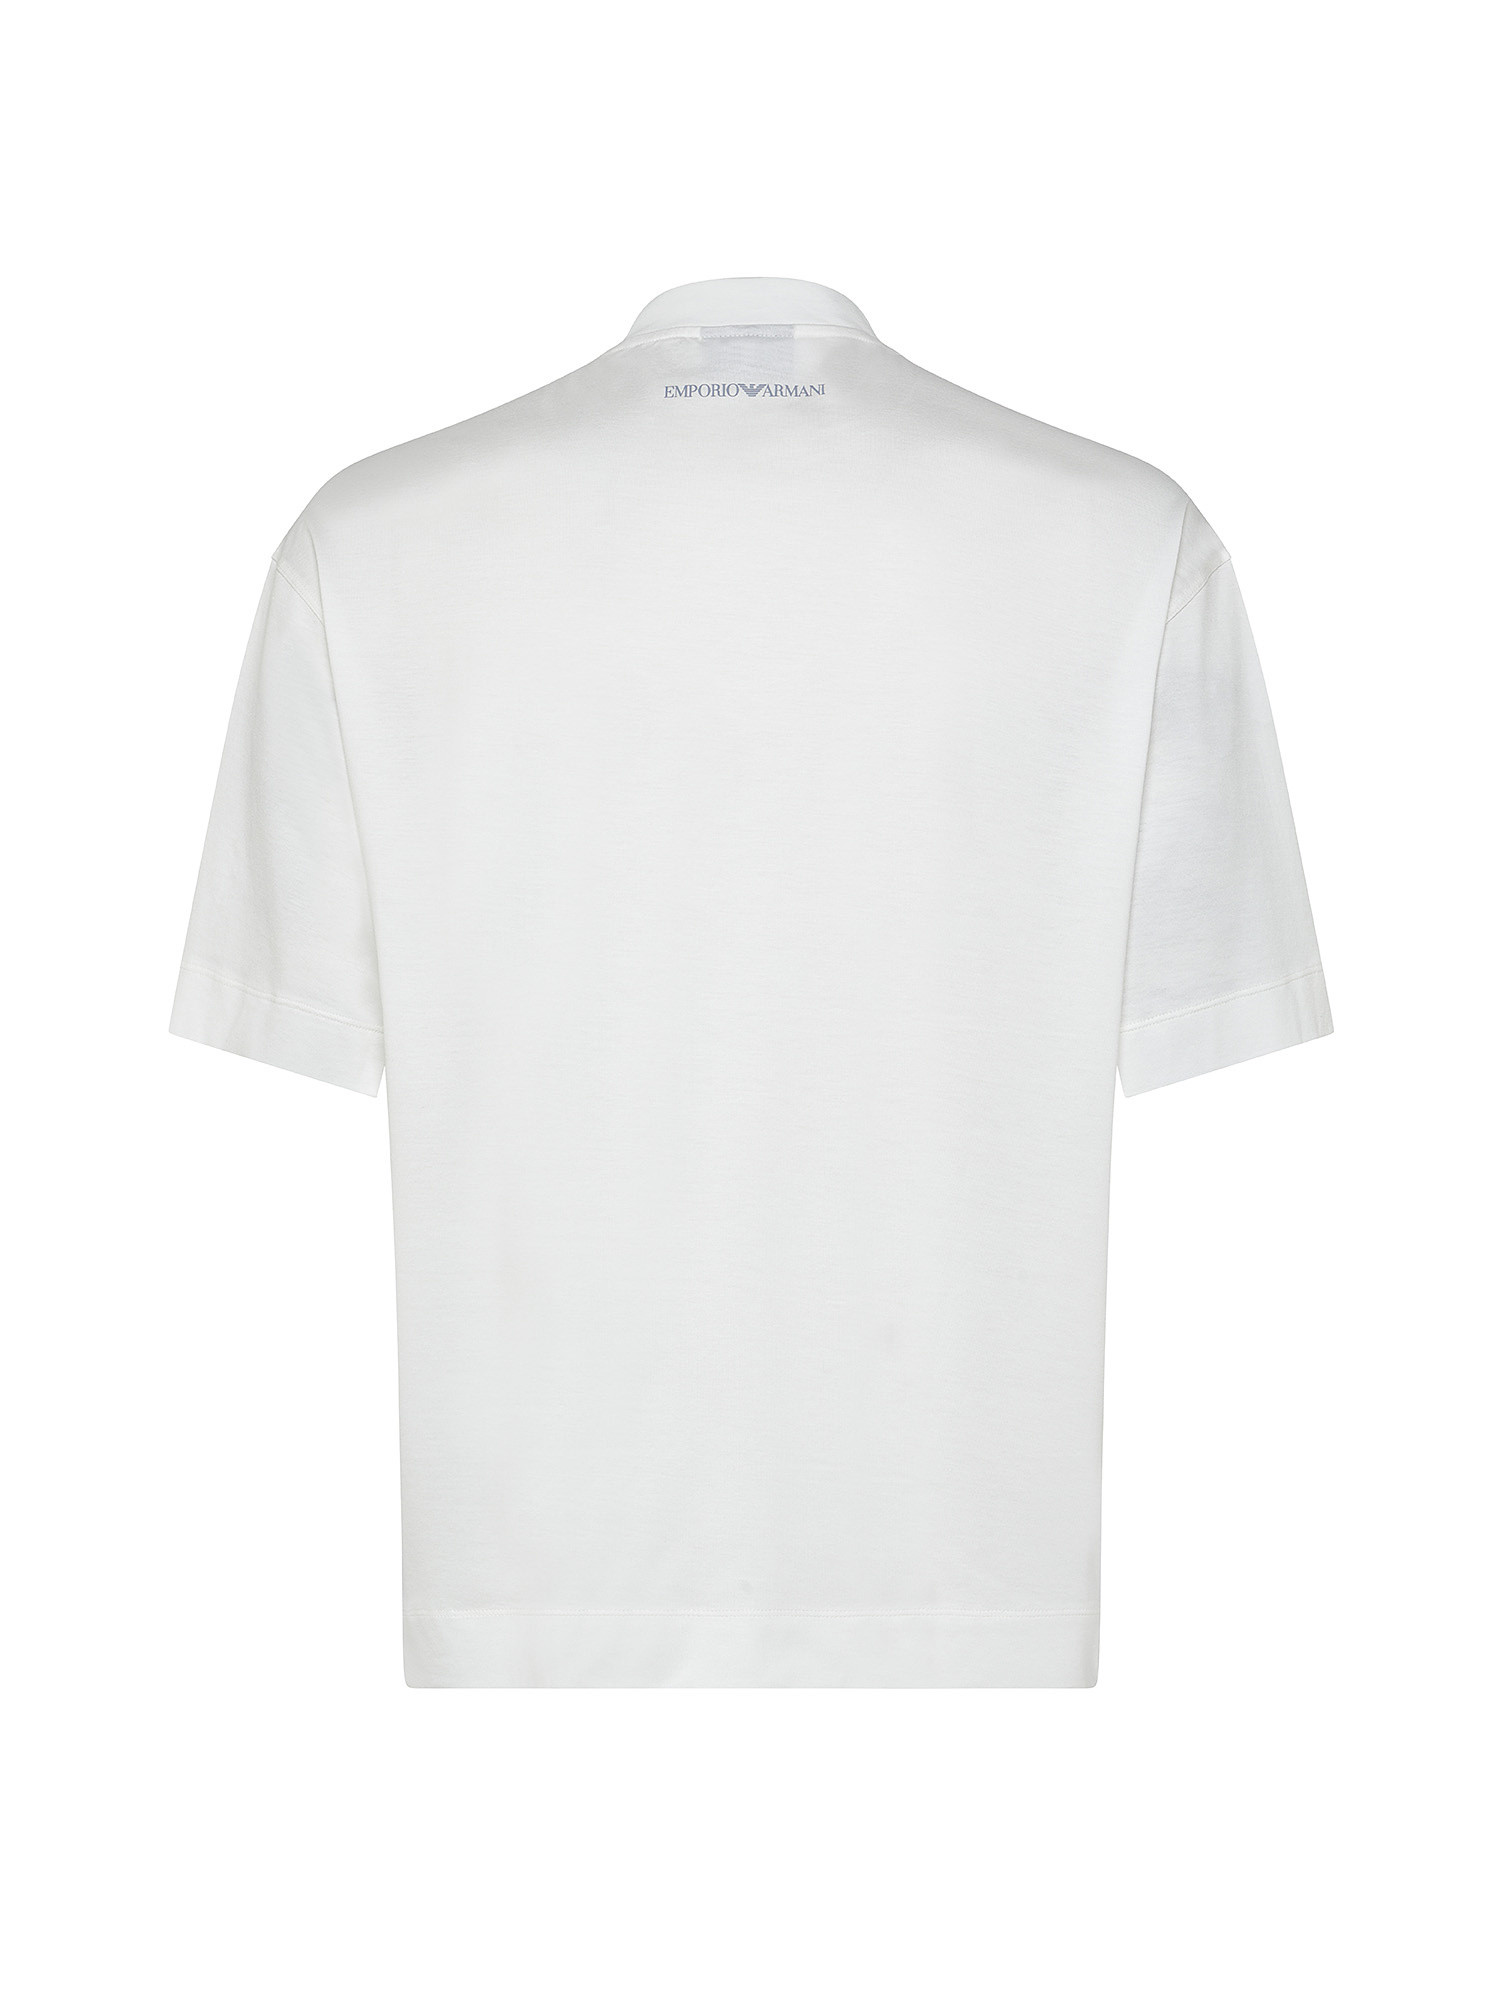 Emporio Armani - Loose-fit T-shirt with print, White, large image number 1